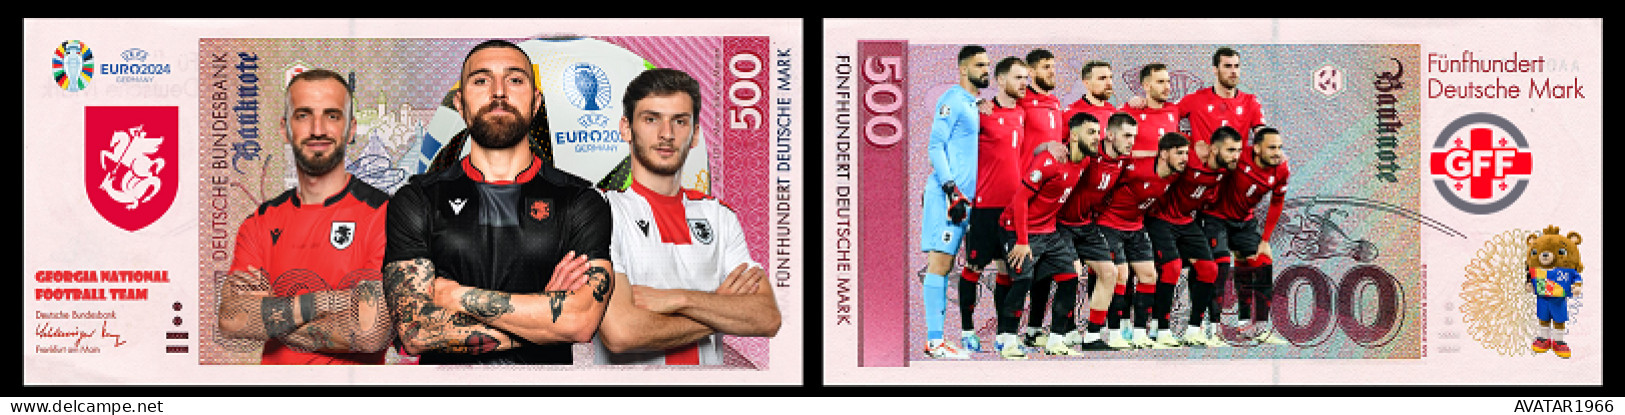 UEFA European Football Championship 2024 qualified country   Georgia 8 pieces Germany fantasy paper money